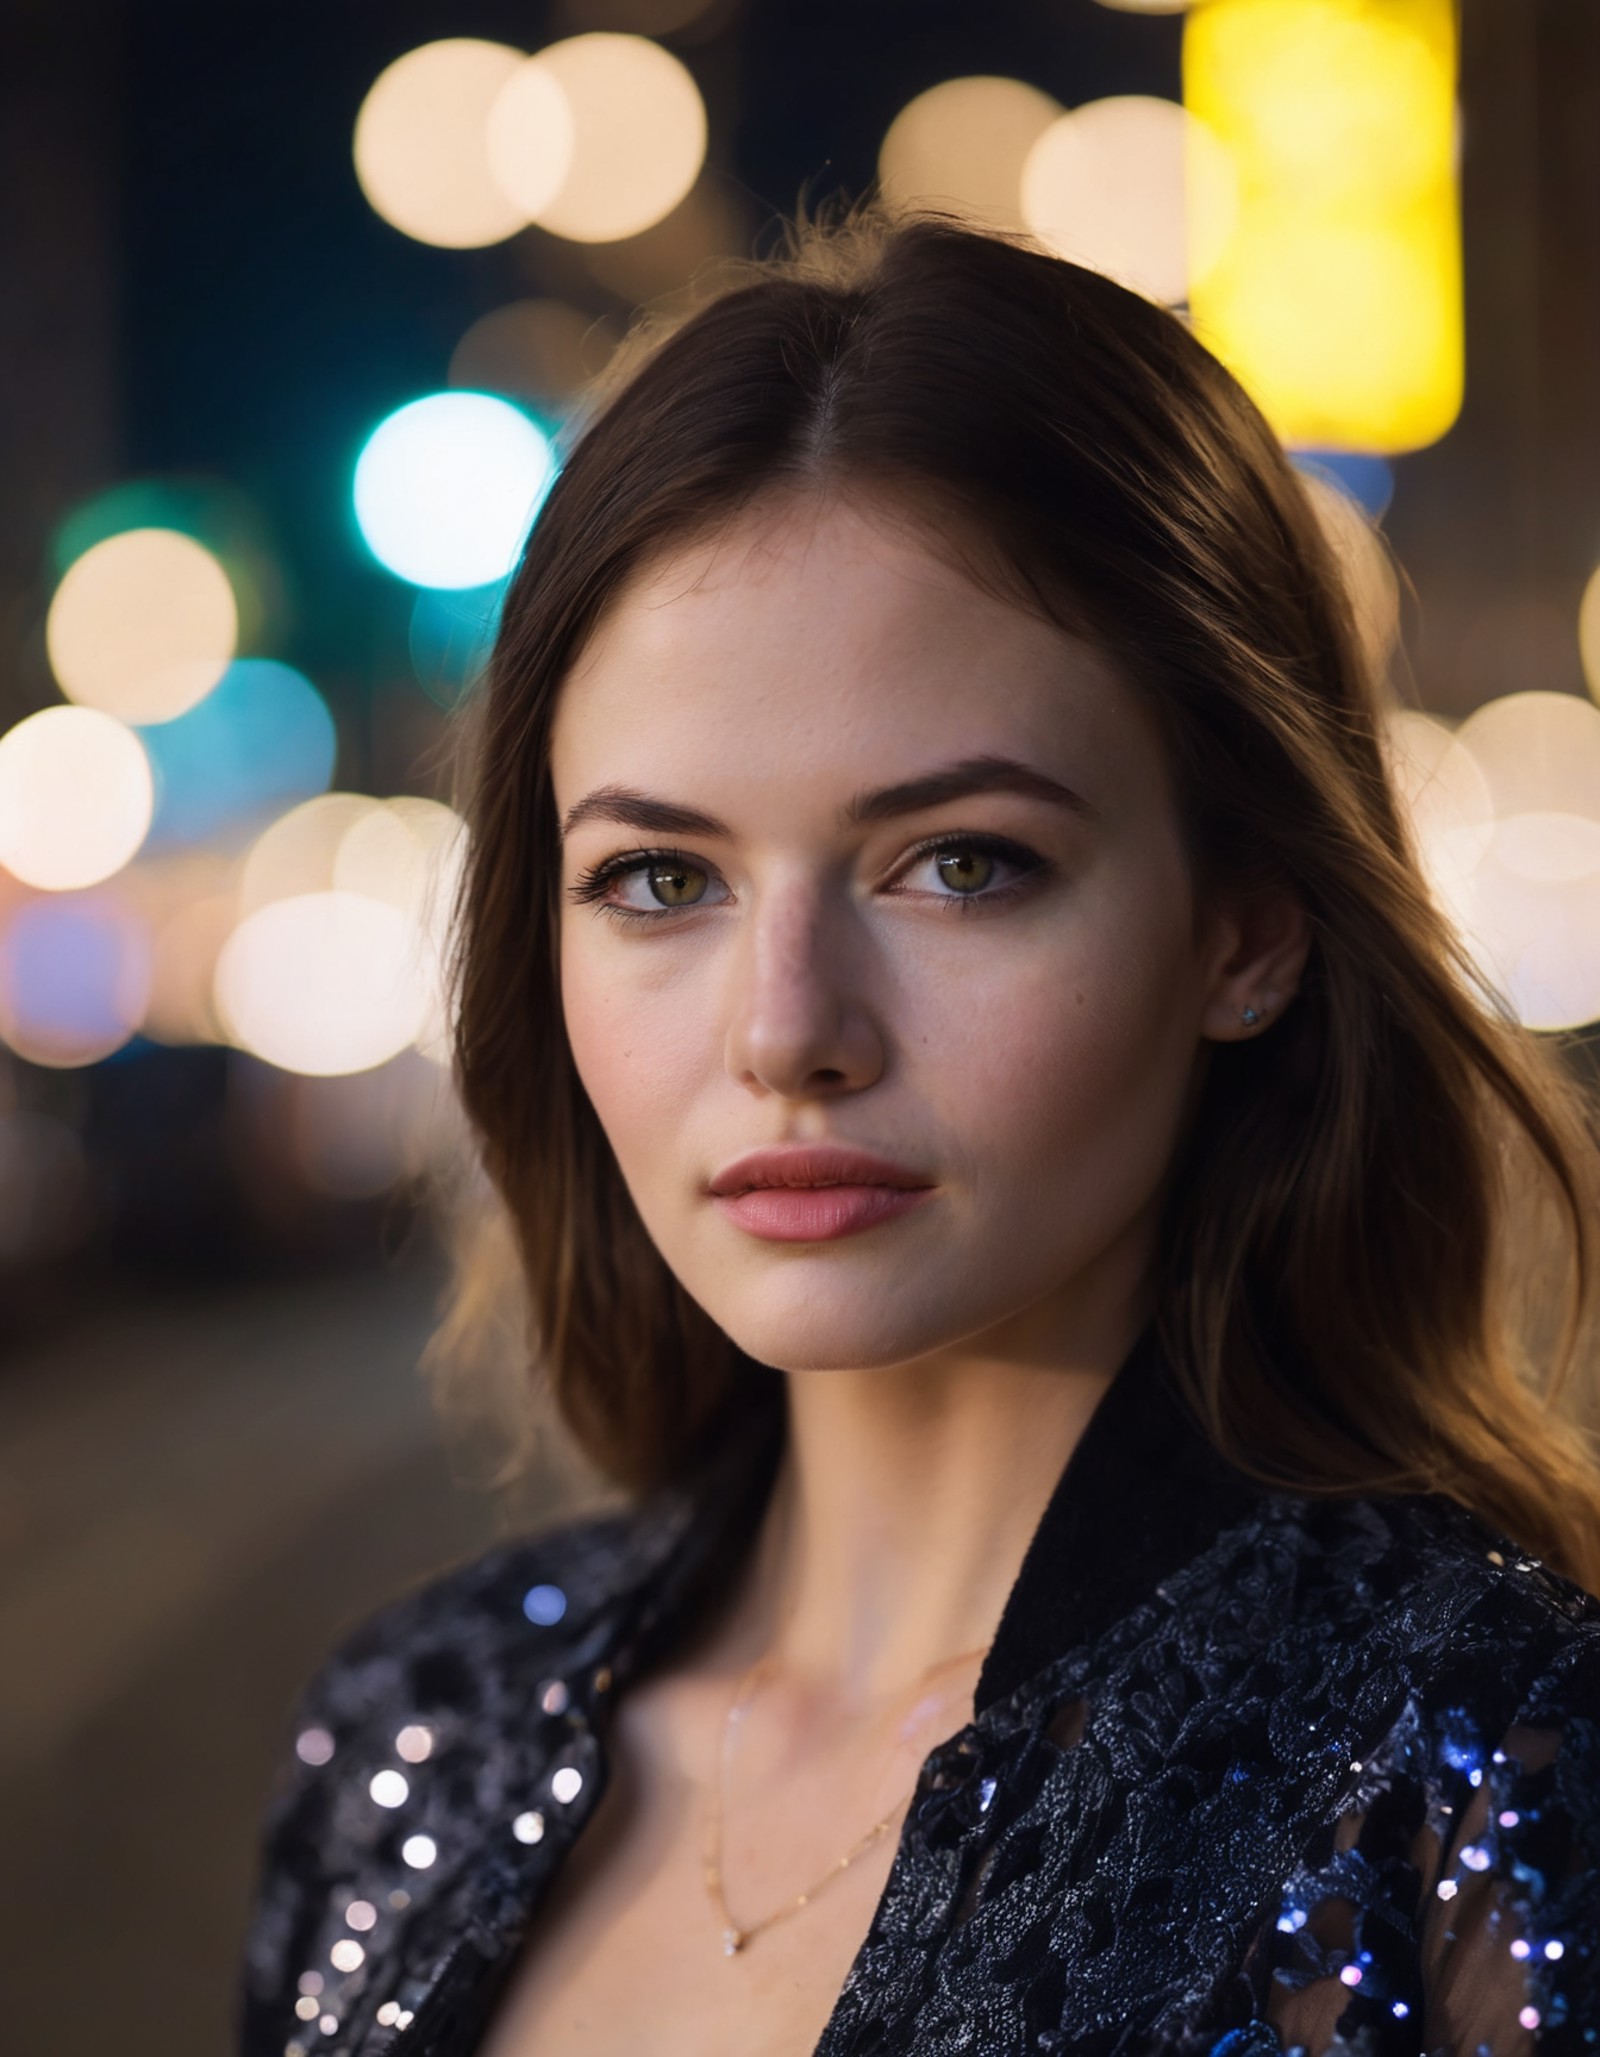 cinematic photo professional fashion close-up portrait photography of a beautiful ((ohwx woman)) in the city at night, Nik...